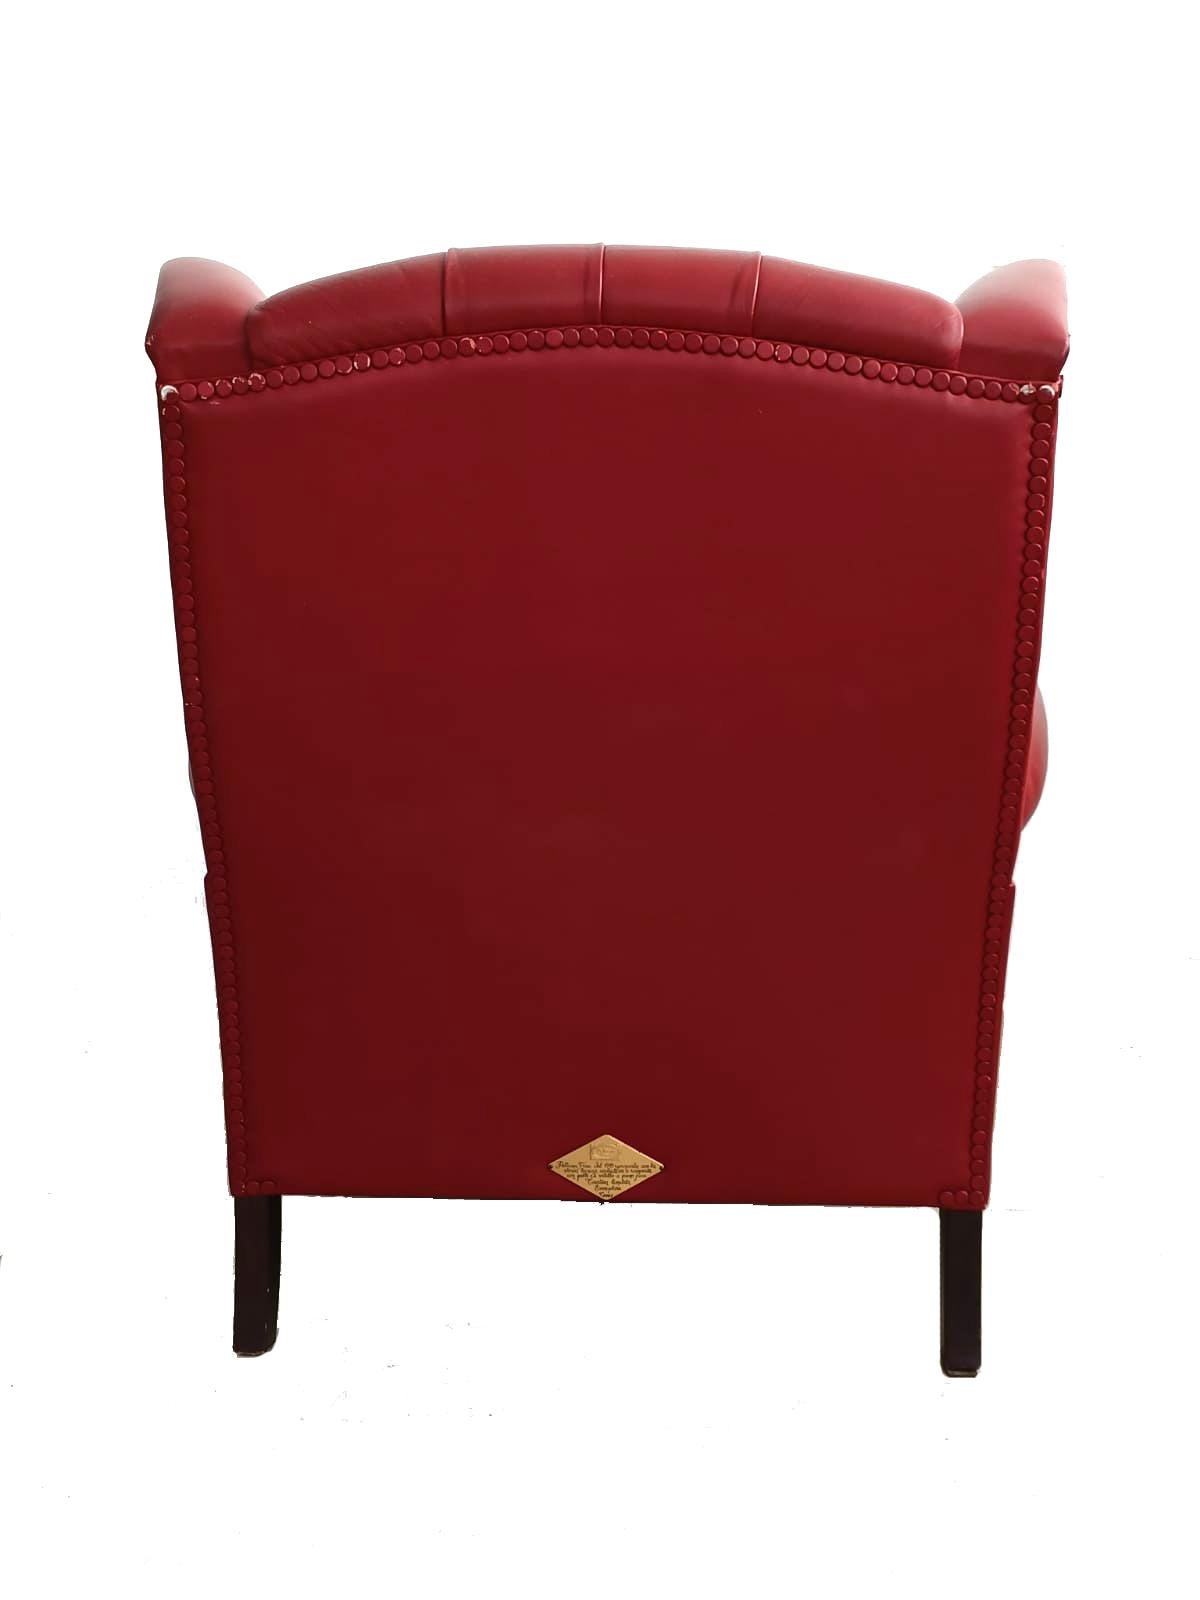 Rococo 1919 Armchair Bergere Model in Century Leather Red Colour with Ashtray